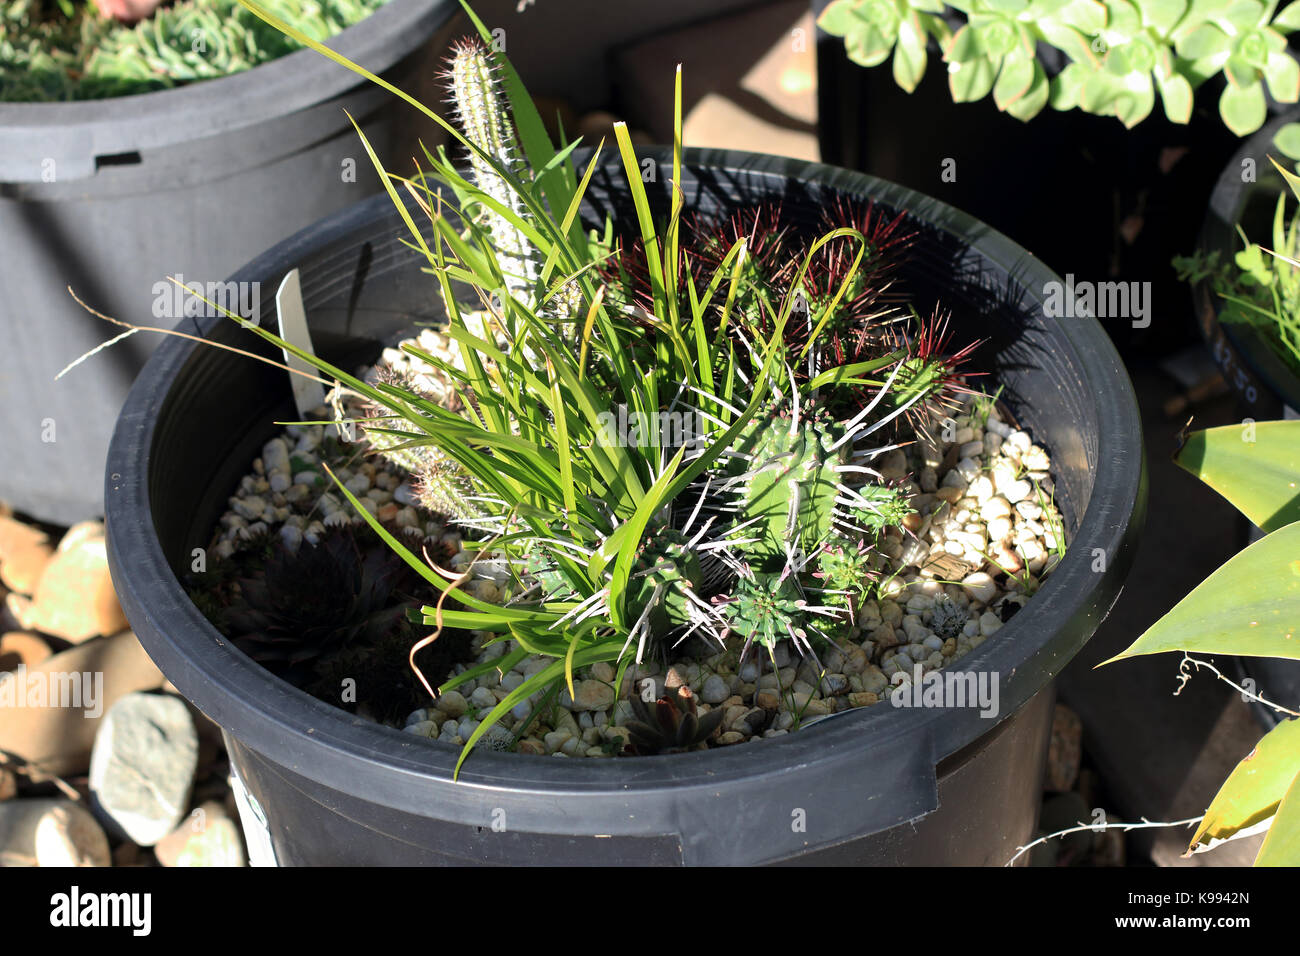 Grass and weeds growing in a pot of Euphorbia plants Stock Photo